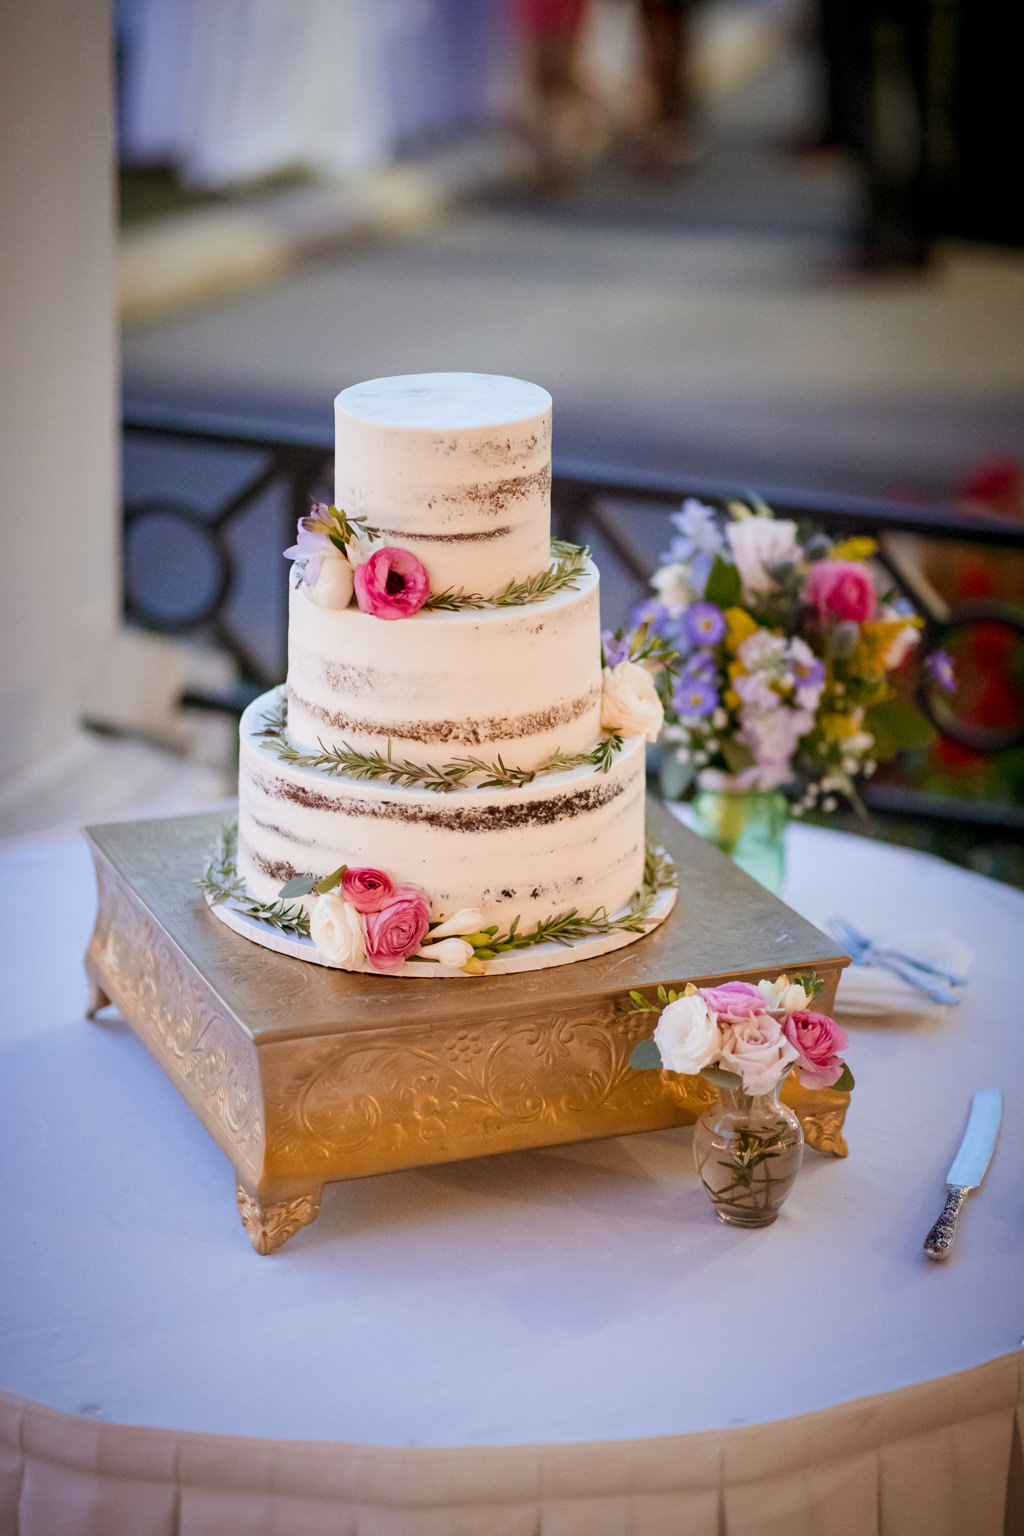 Elegant Southern Chic Three Tier Naked Wedding Cake with White Forsting, Pink and White Flowers and Greenery, on Gold Square Cake Stand, with Colorful Floral Arrangement on Florida Wedding Cake Table